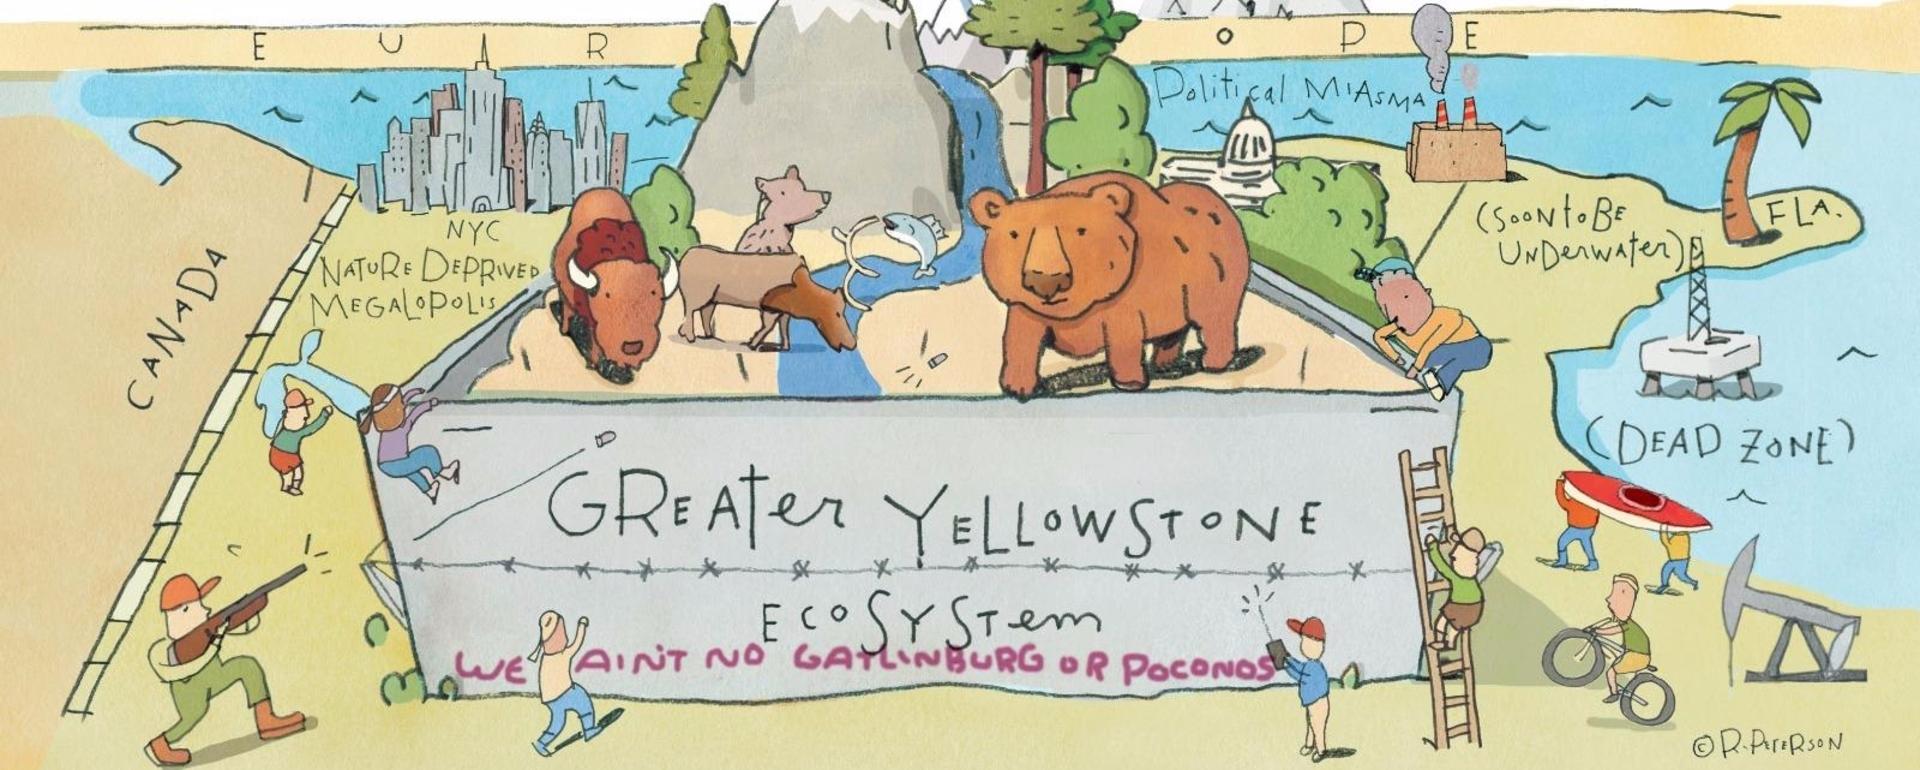 Why is Greater Yellowstone extraordinary?